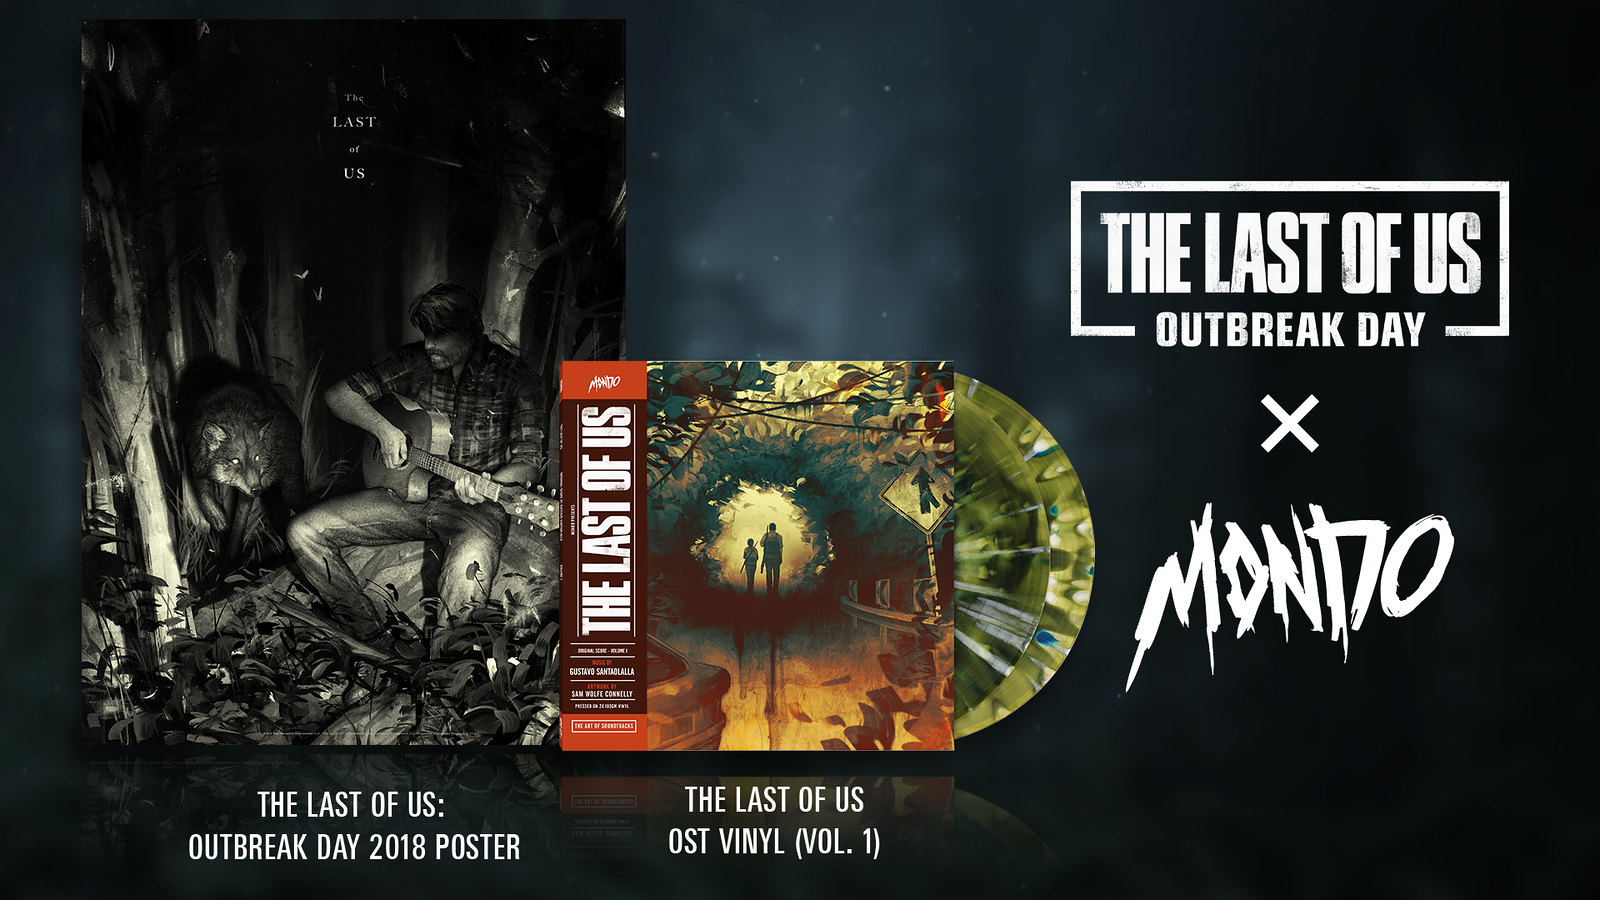 Outbreak Day: The Last of Us